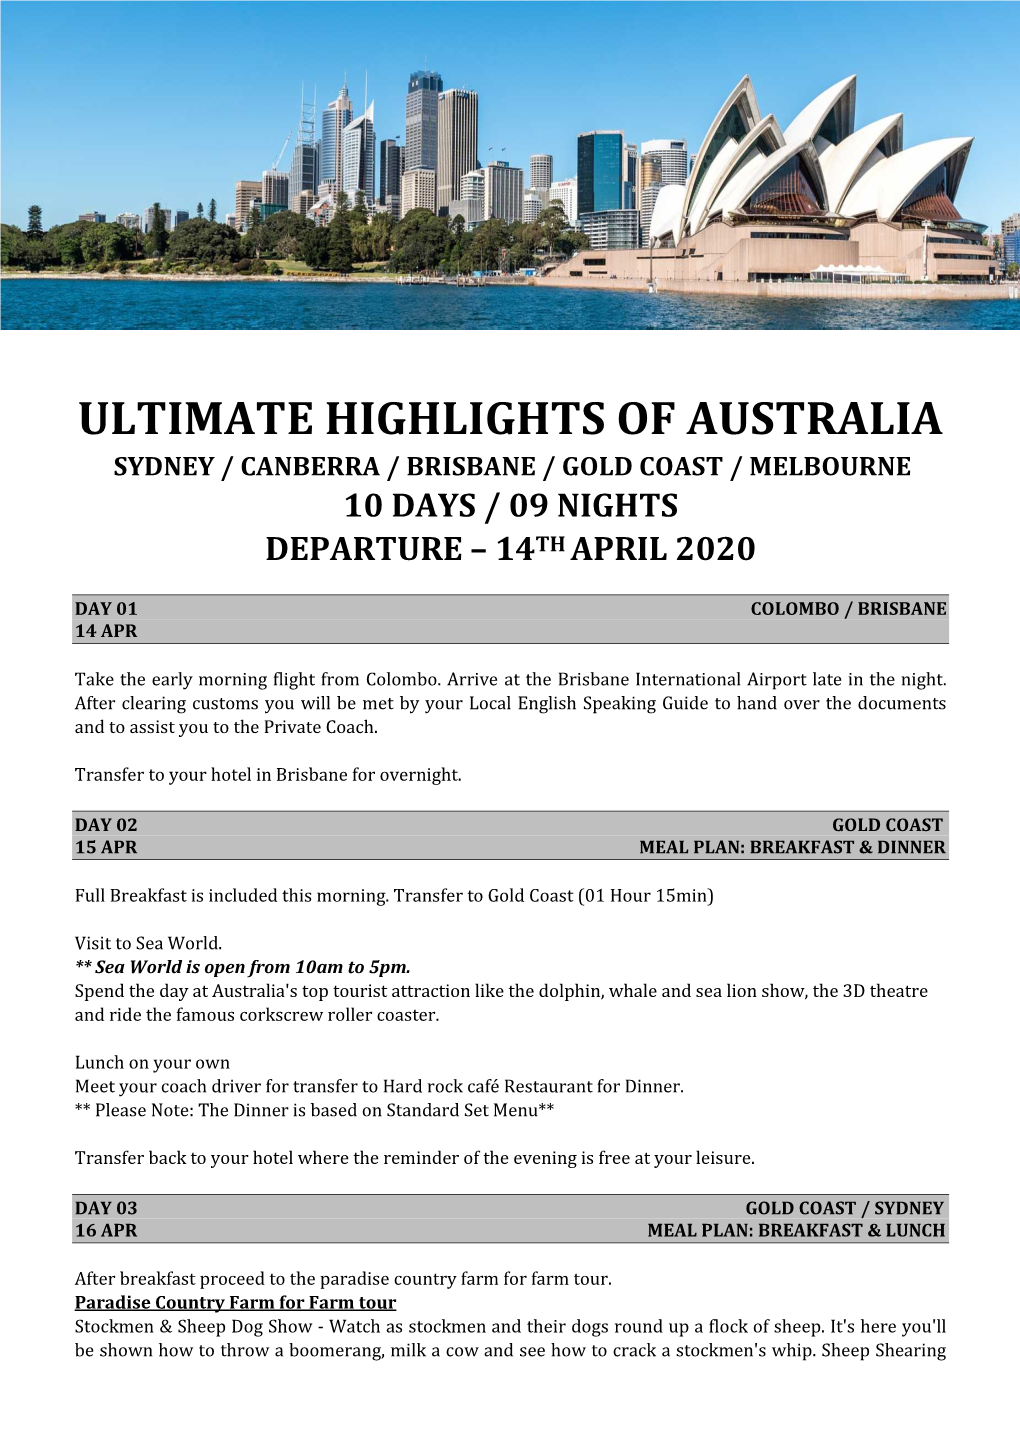 Download Complete Itinerary